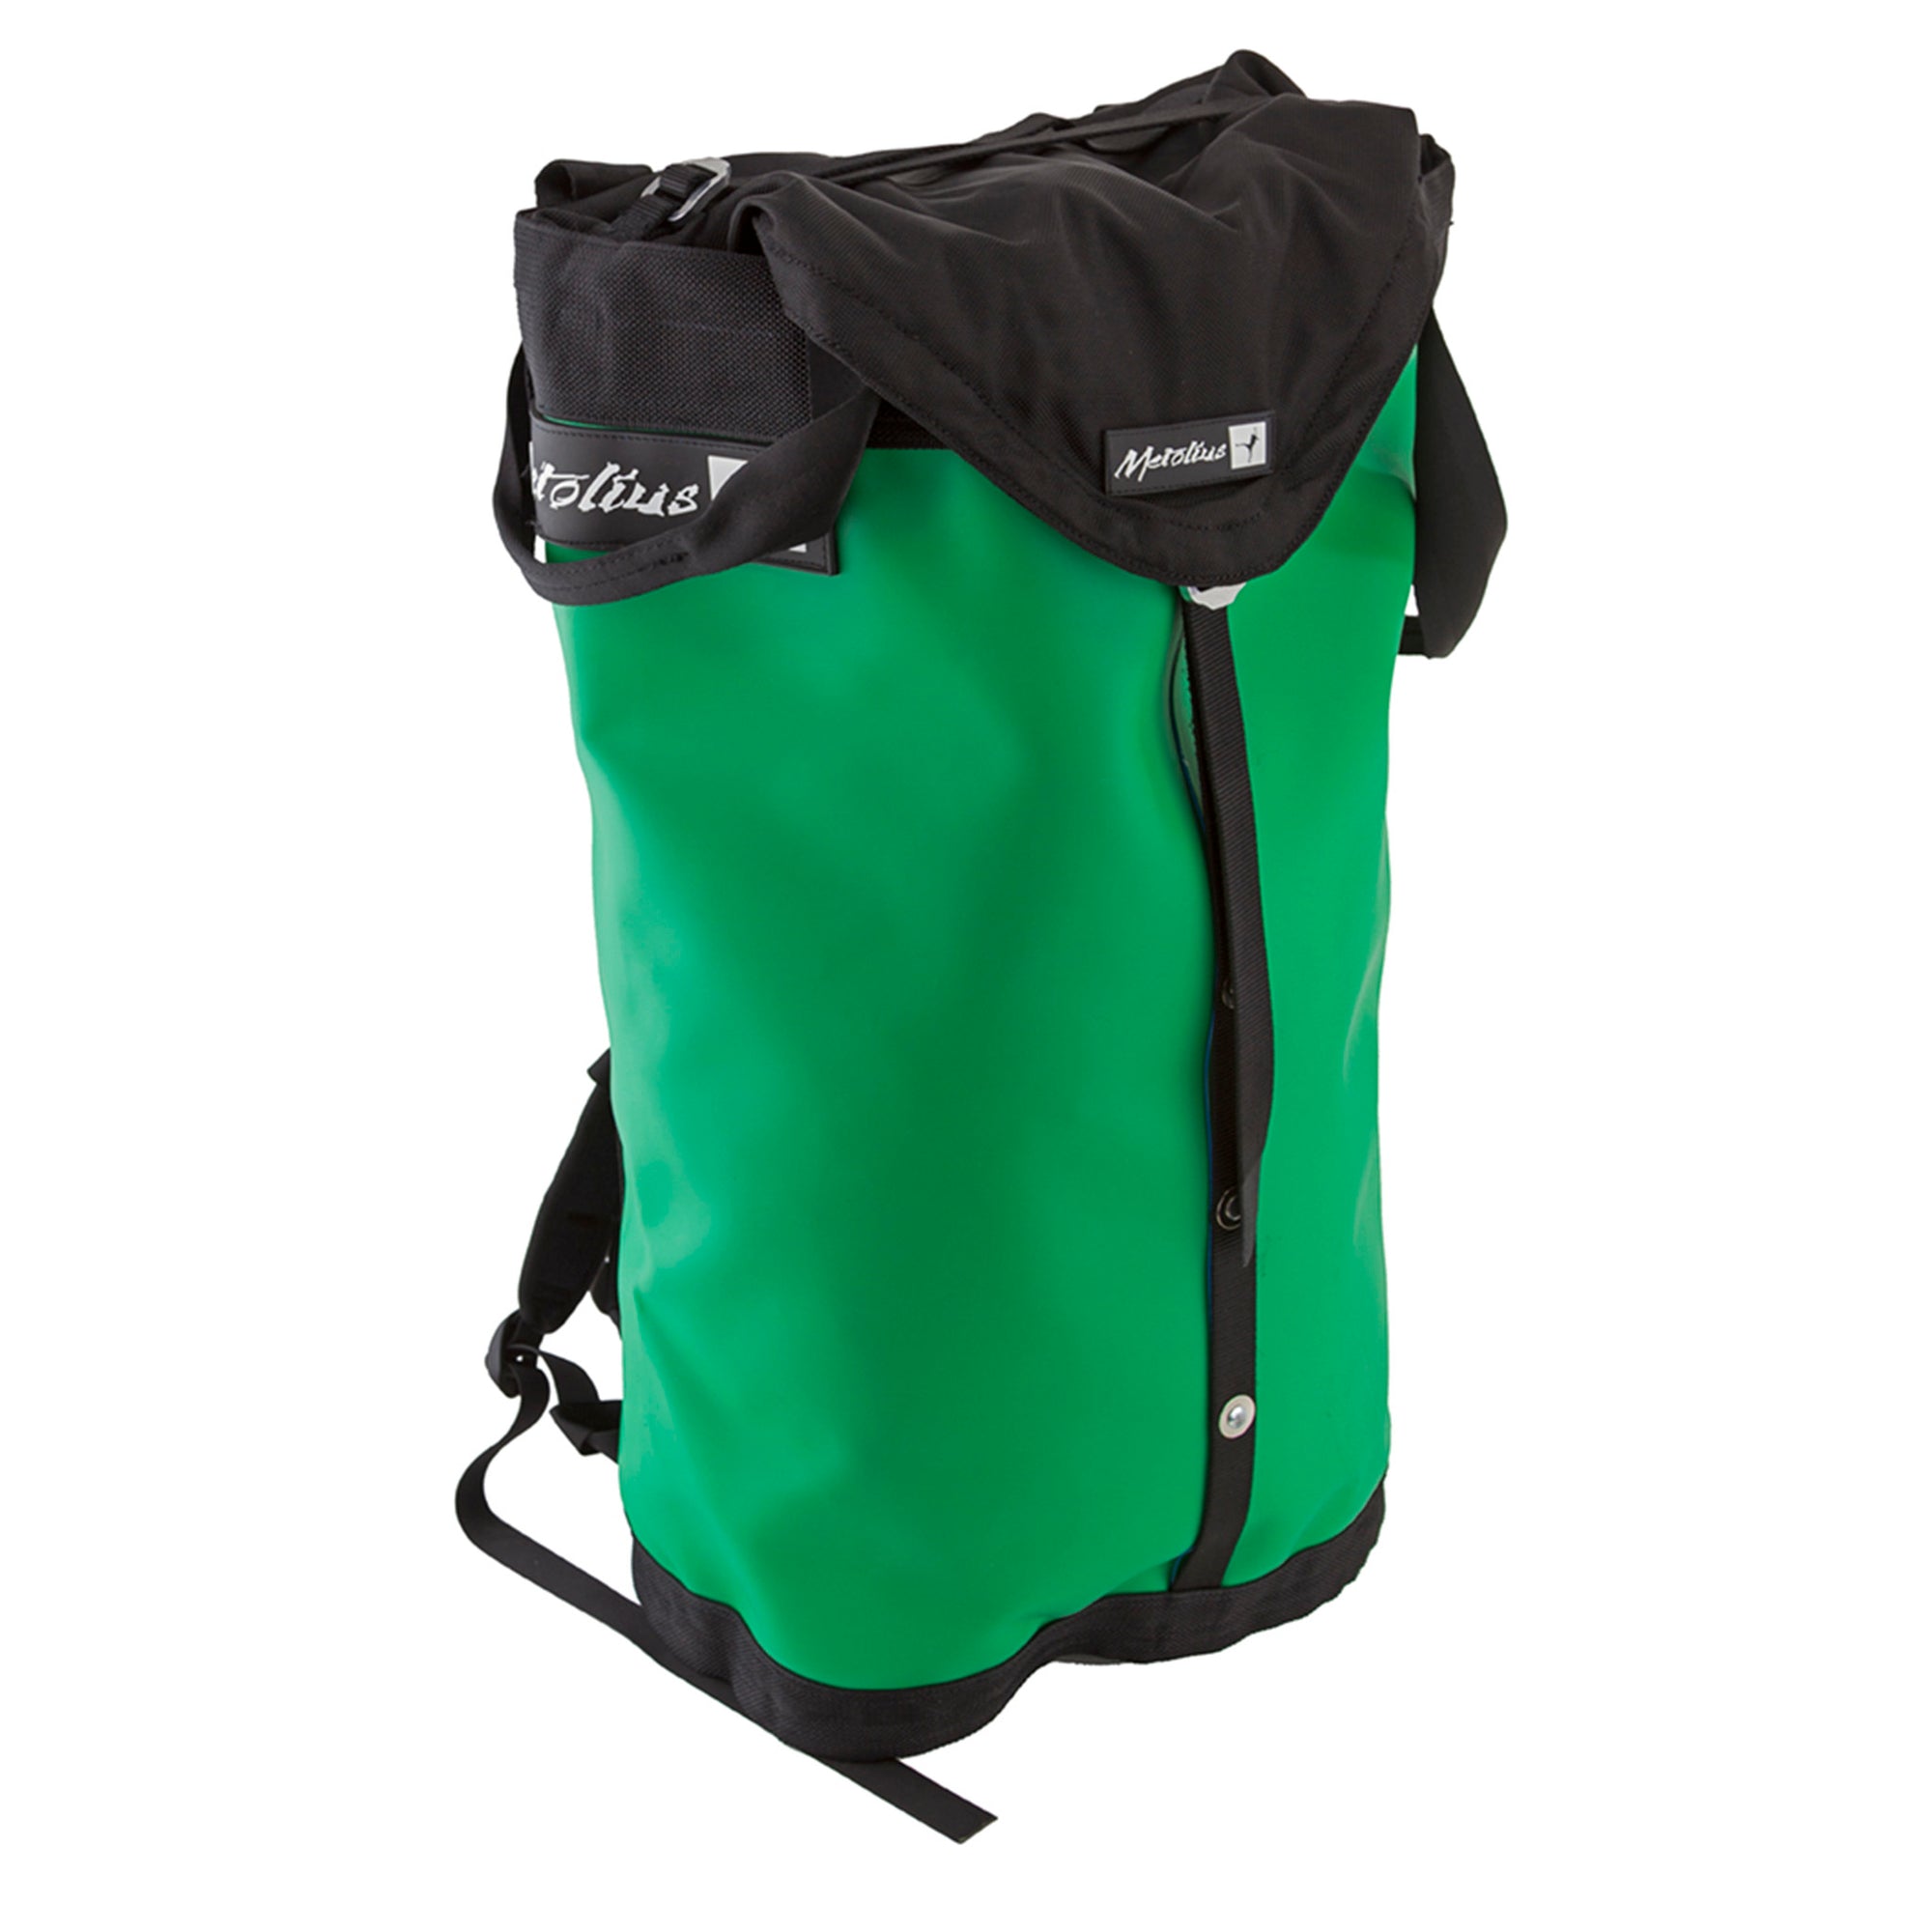 a photo of the metolius quarter dome climbing pack